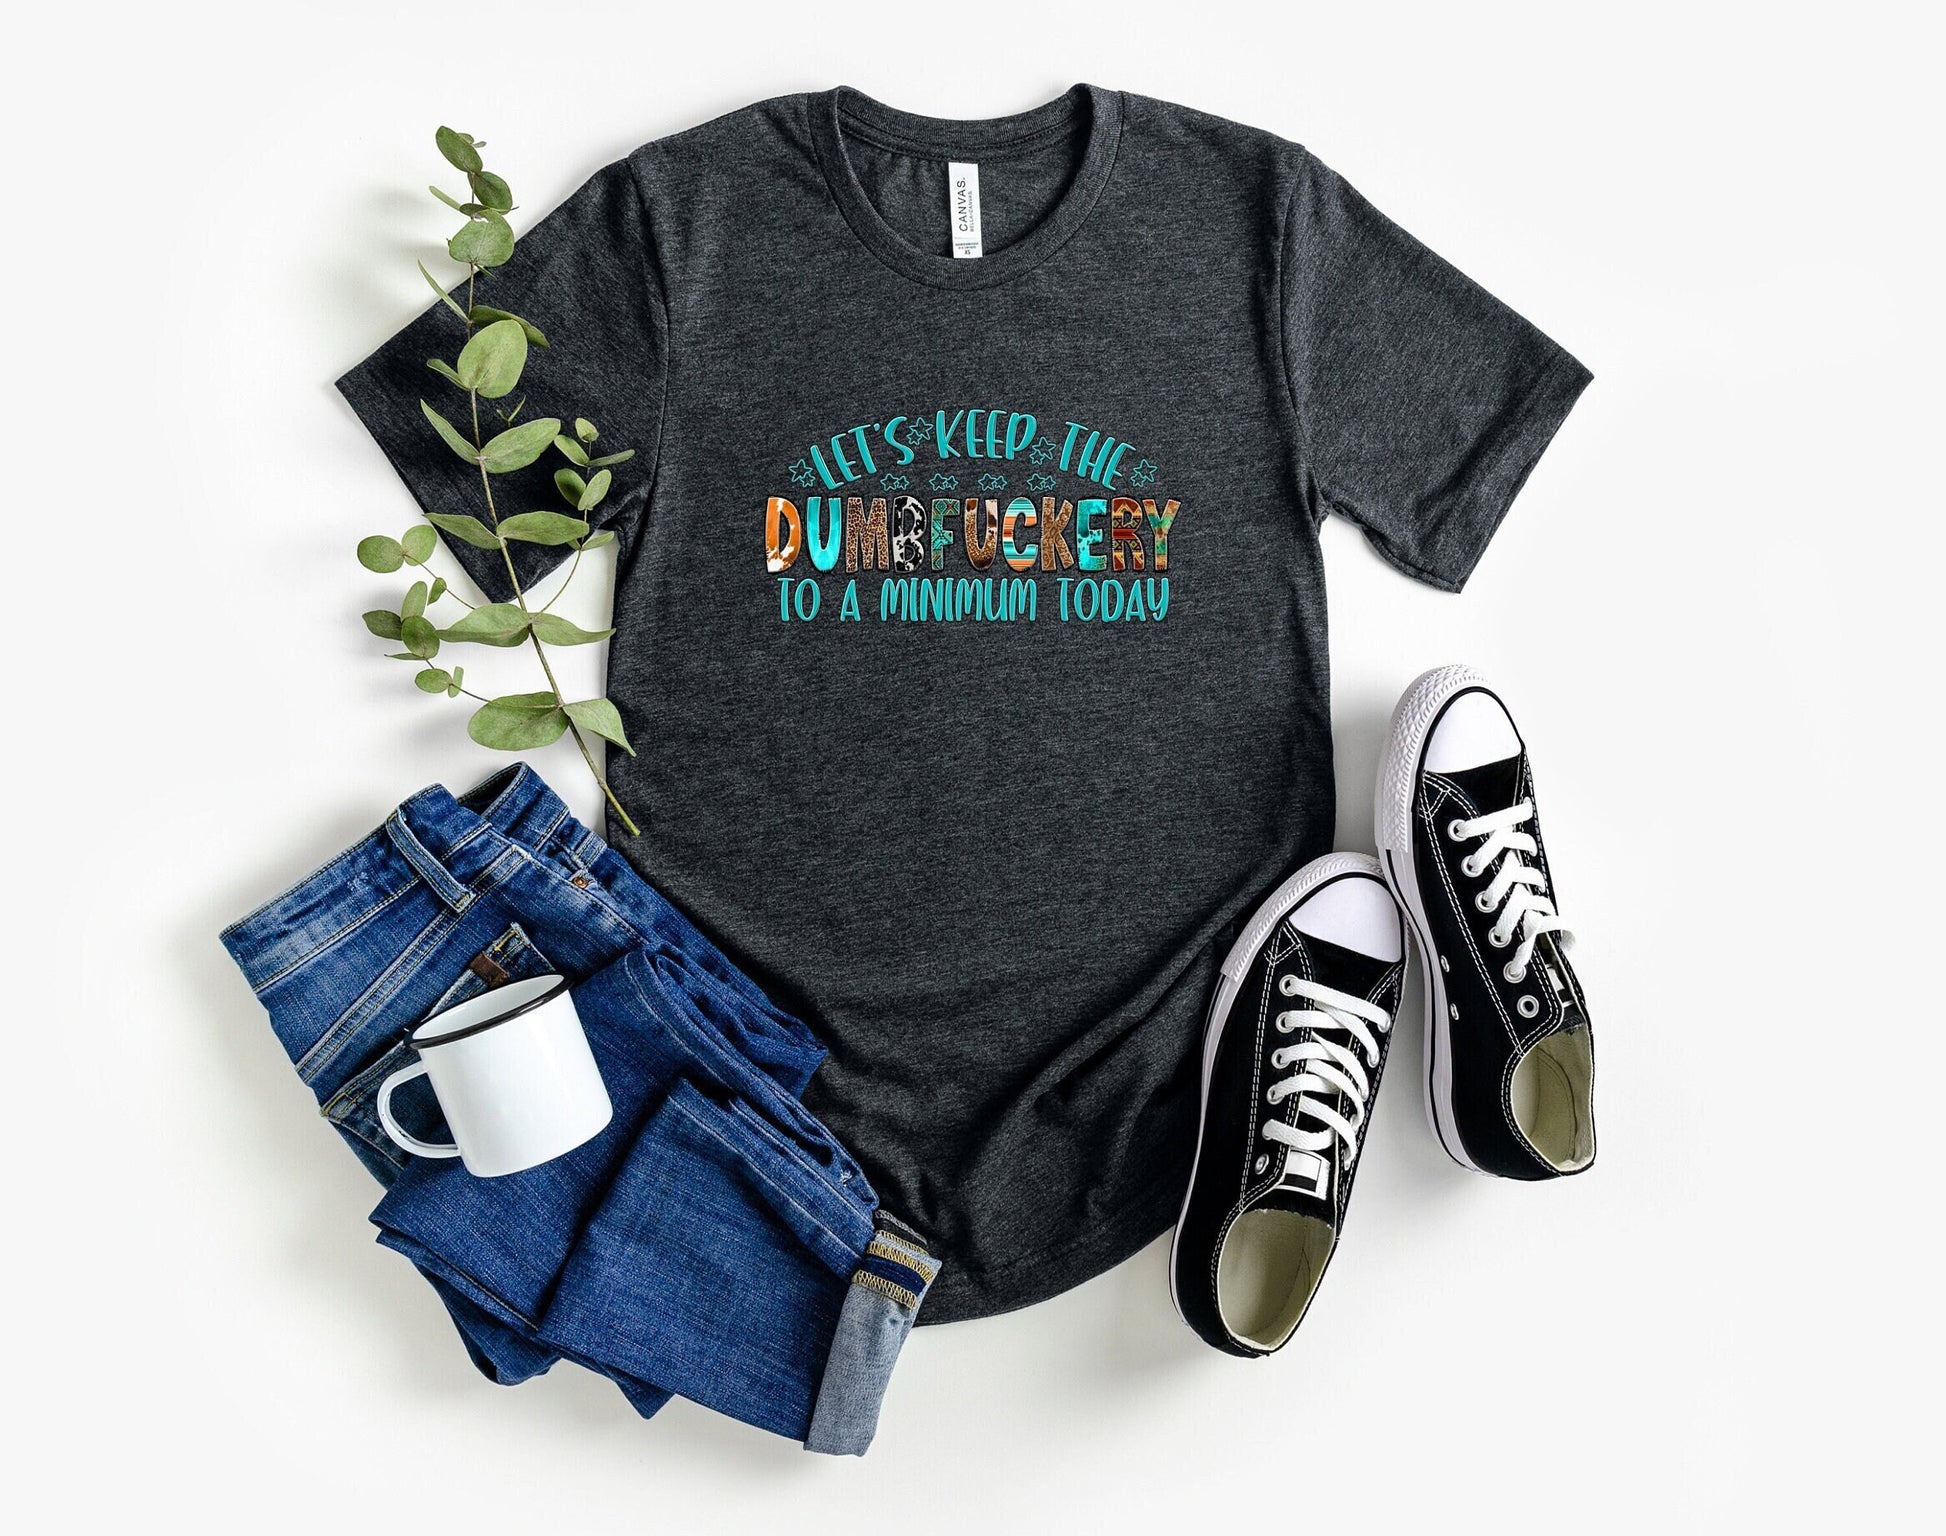 A Stylish, Comfortable yet hilarious Adult Humor T Shirt.  Lets Keep the DumbFuckery to a minimum today shirt.  Get a few laughs with your friends and coworkers with this great Tee.  You&#39;re sure to have a blast time and time again.